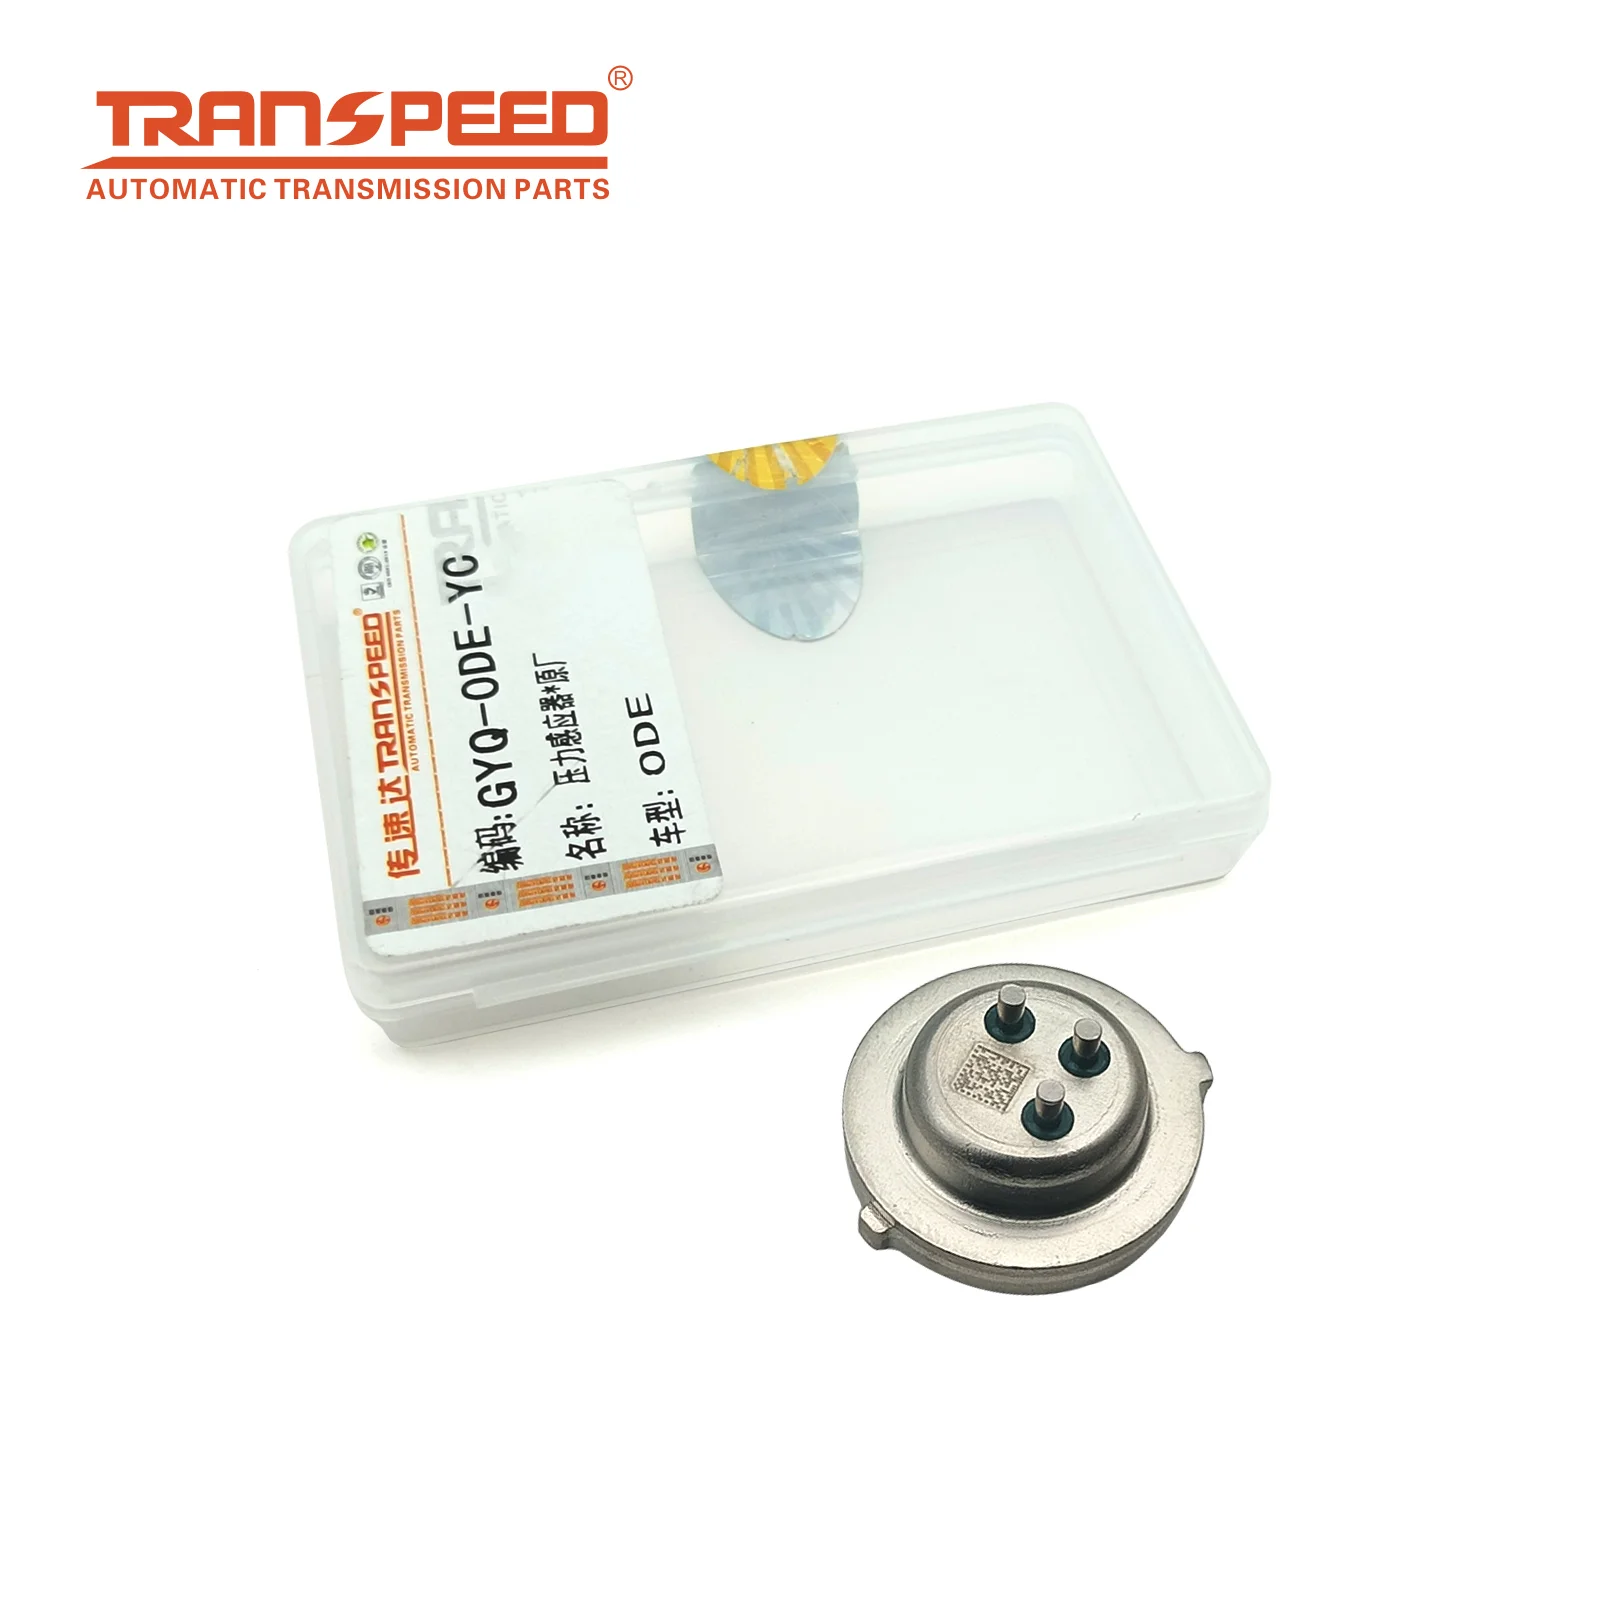 TRANSPEED ڵ ӱ Ŭġ з , ƿ Q3, ٰ Ʈ, ÷ Ƽ, 0DE, DQ500, DQ380, DQ381